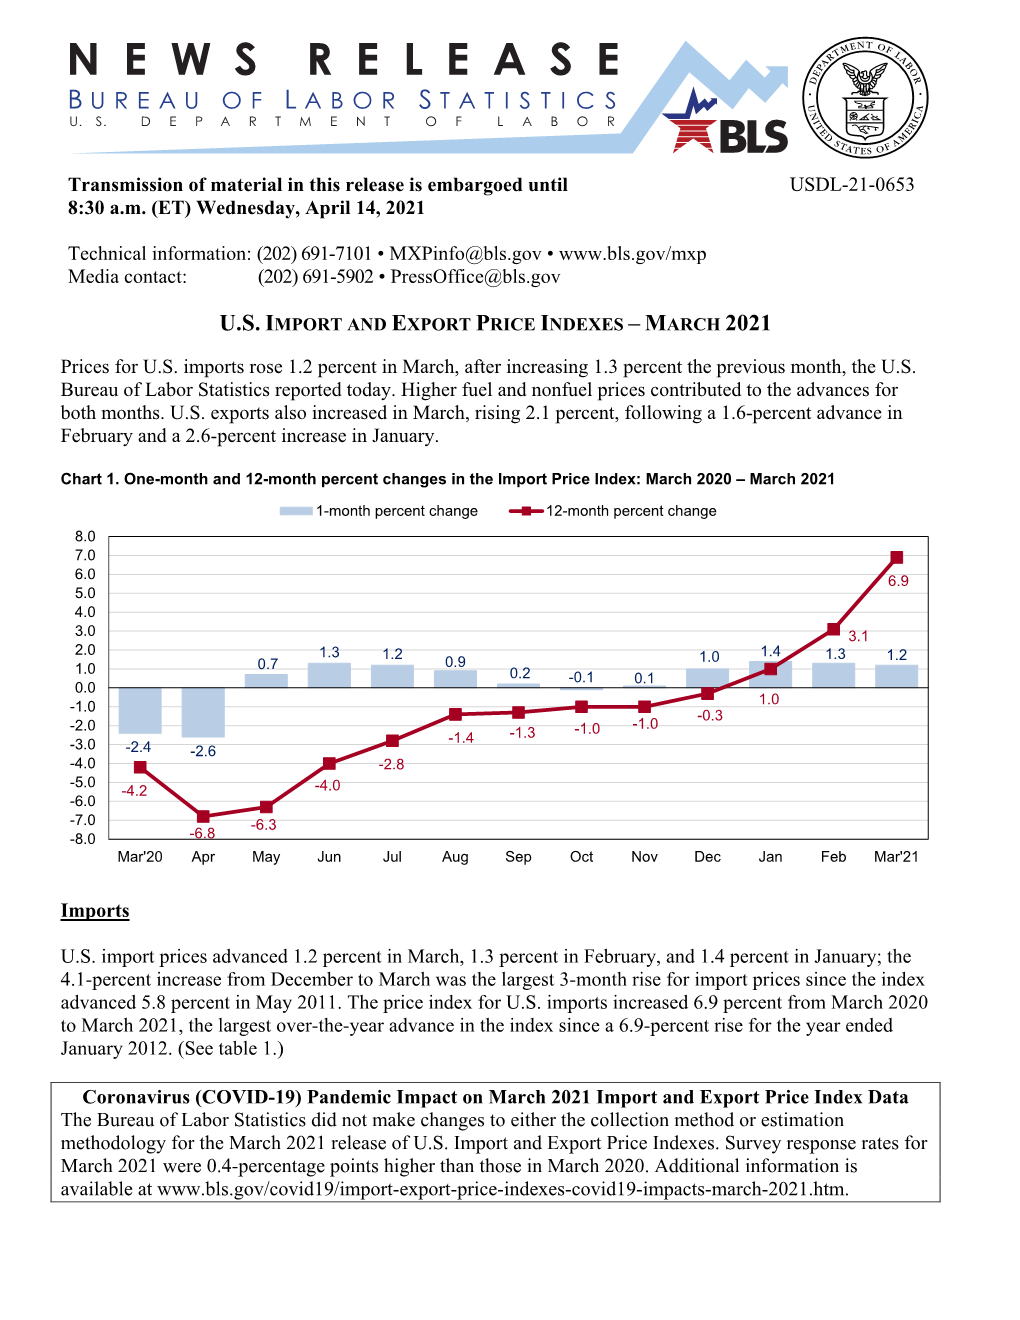 U.S. Import and Export Price Indexes March 2021